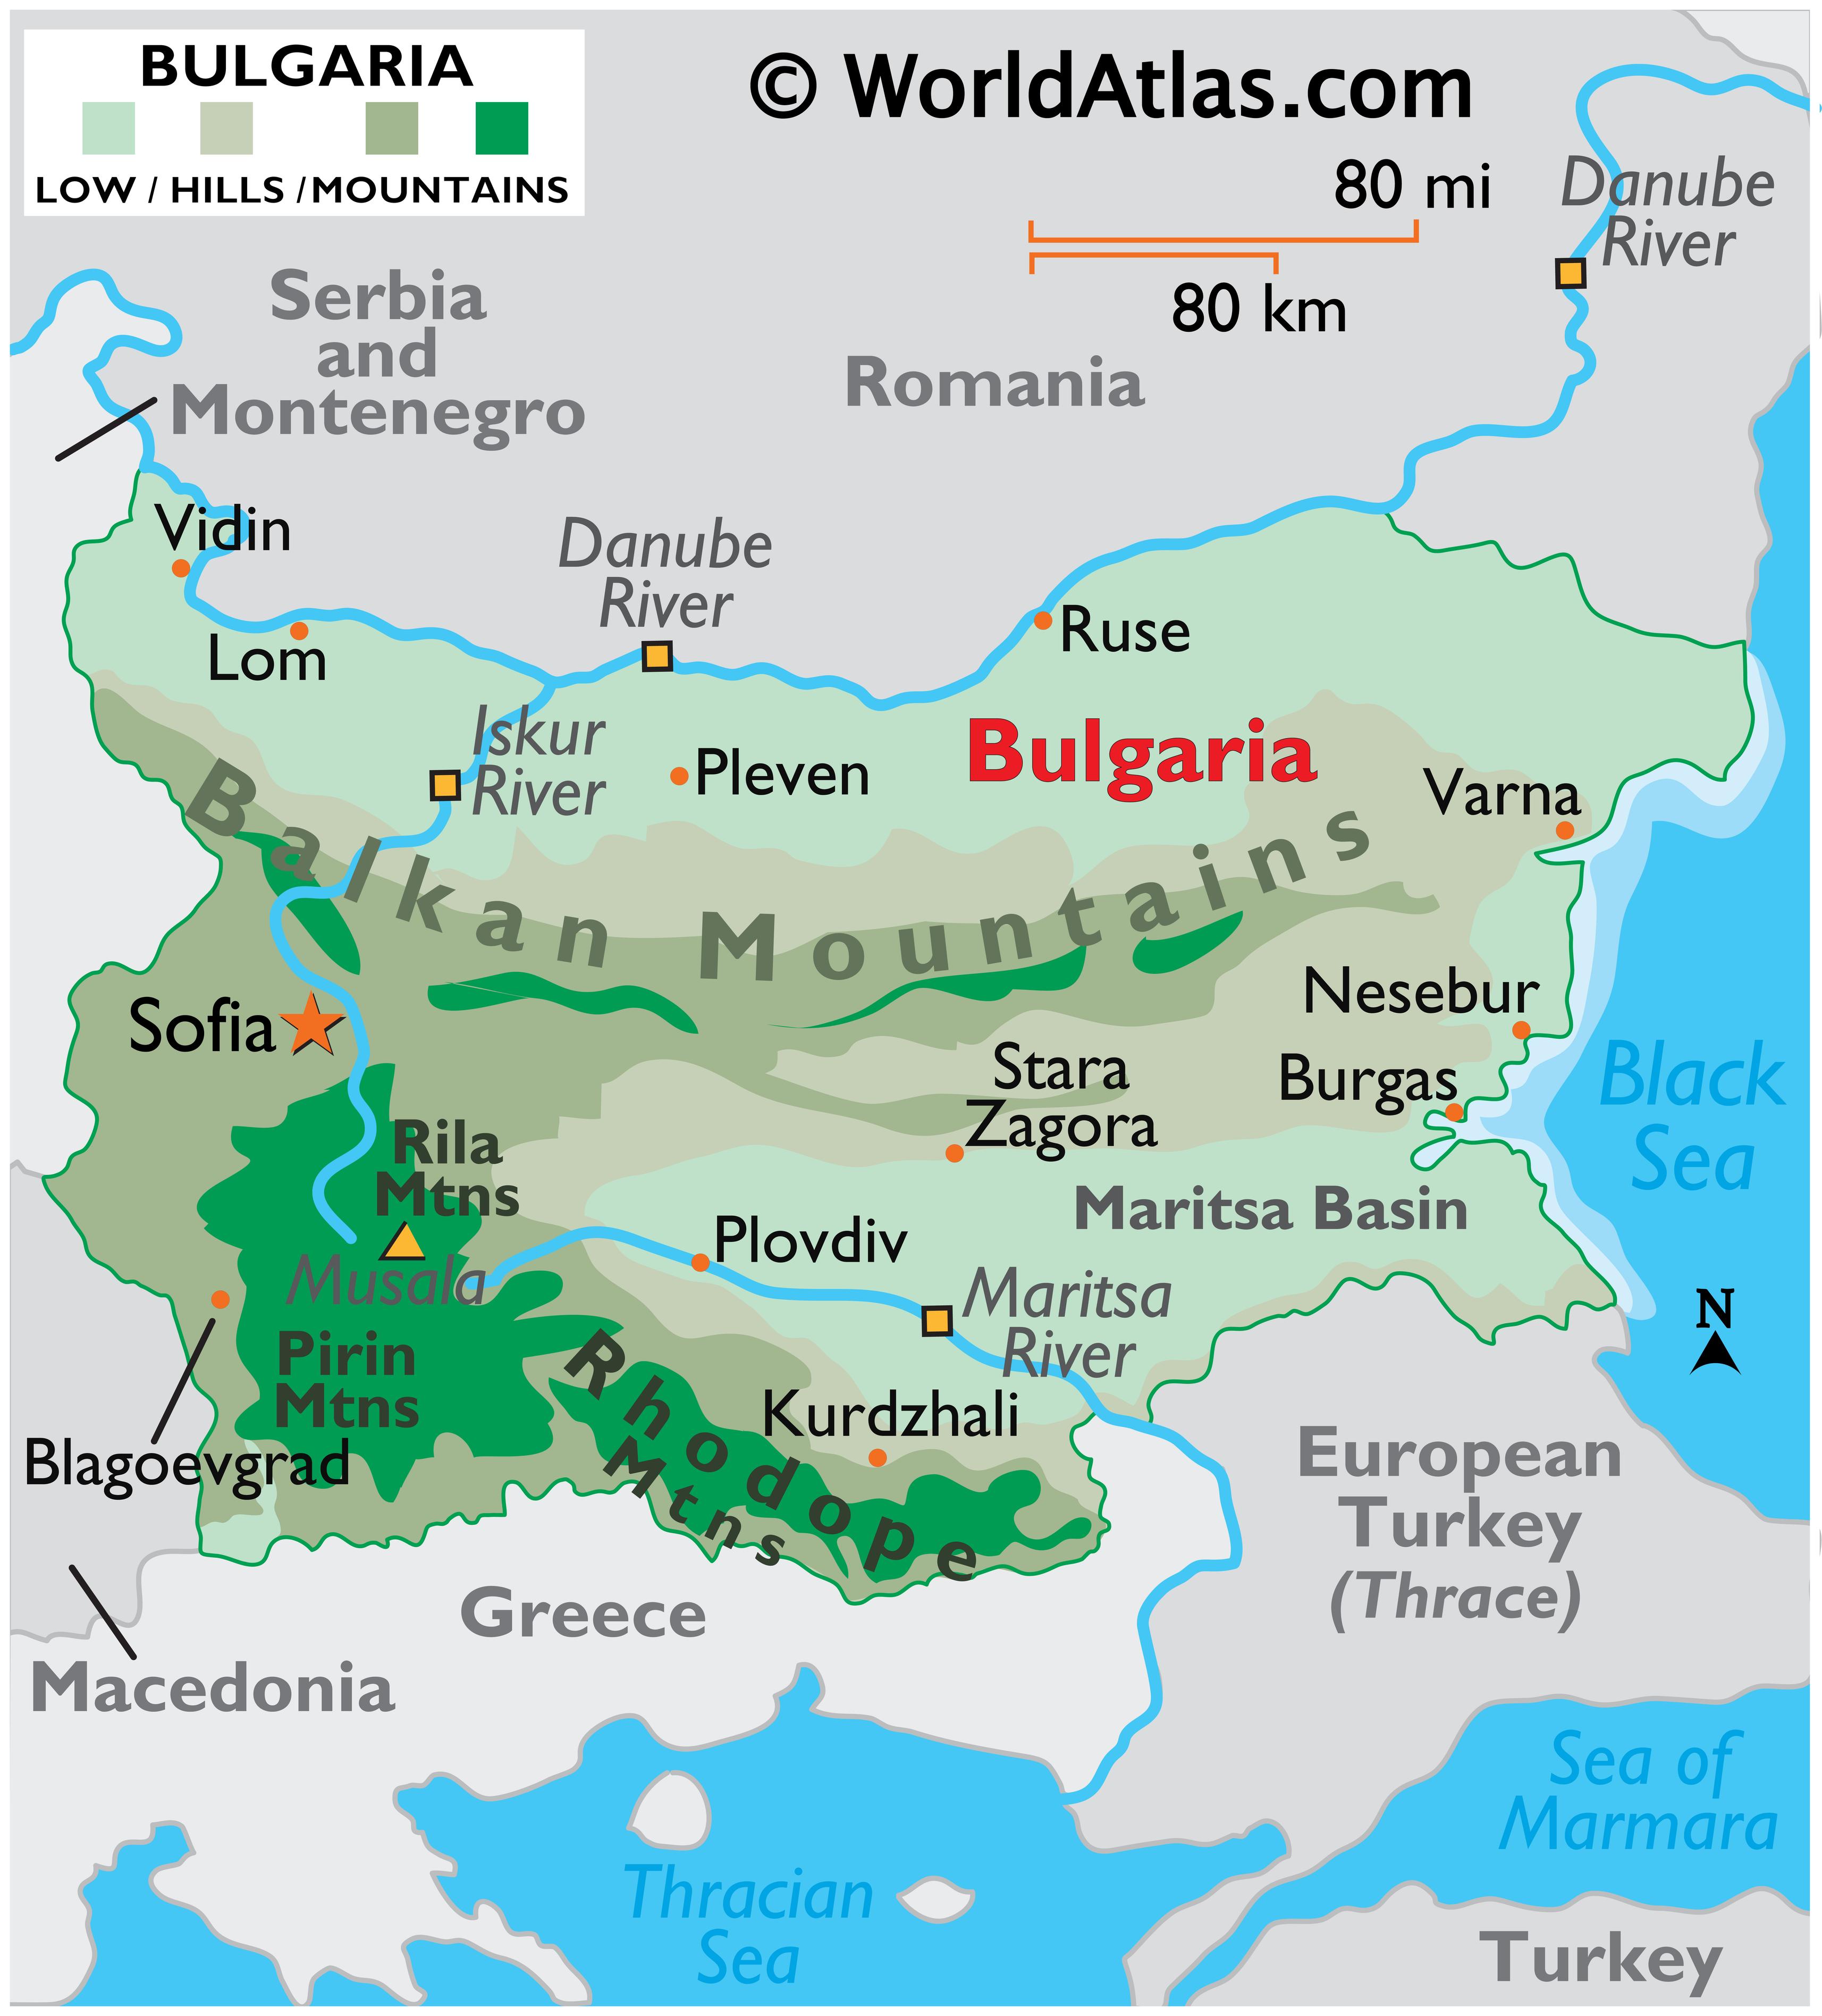 What is Bulgaria famous for?